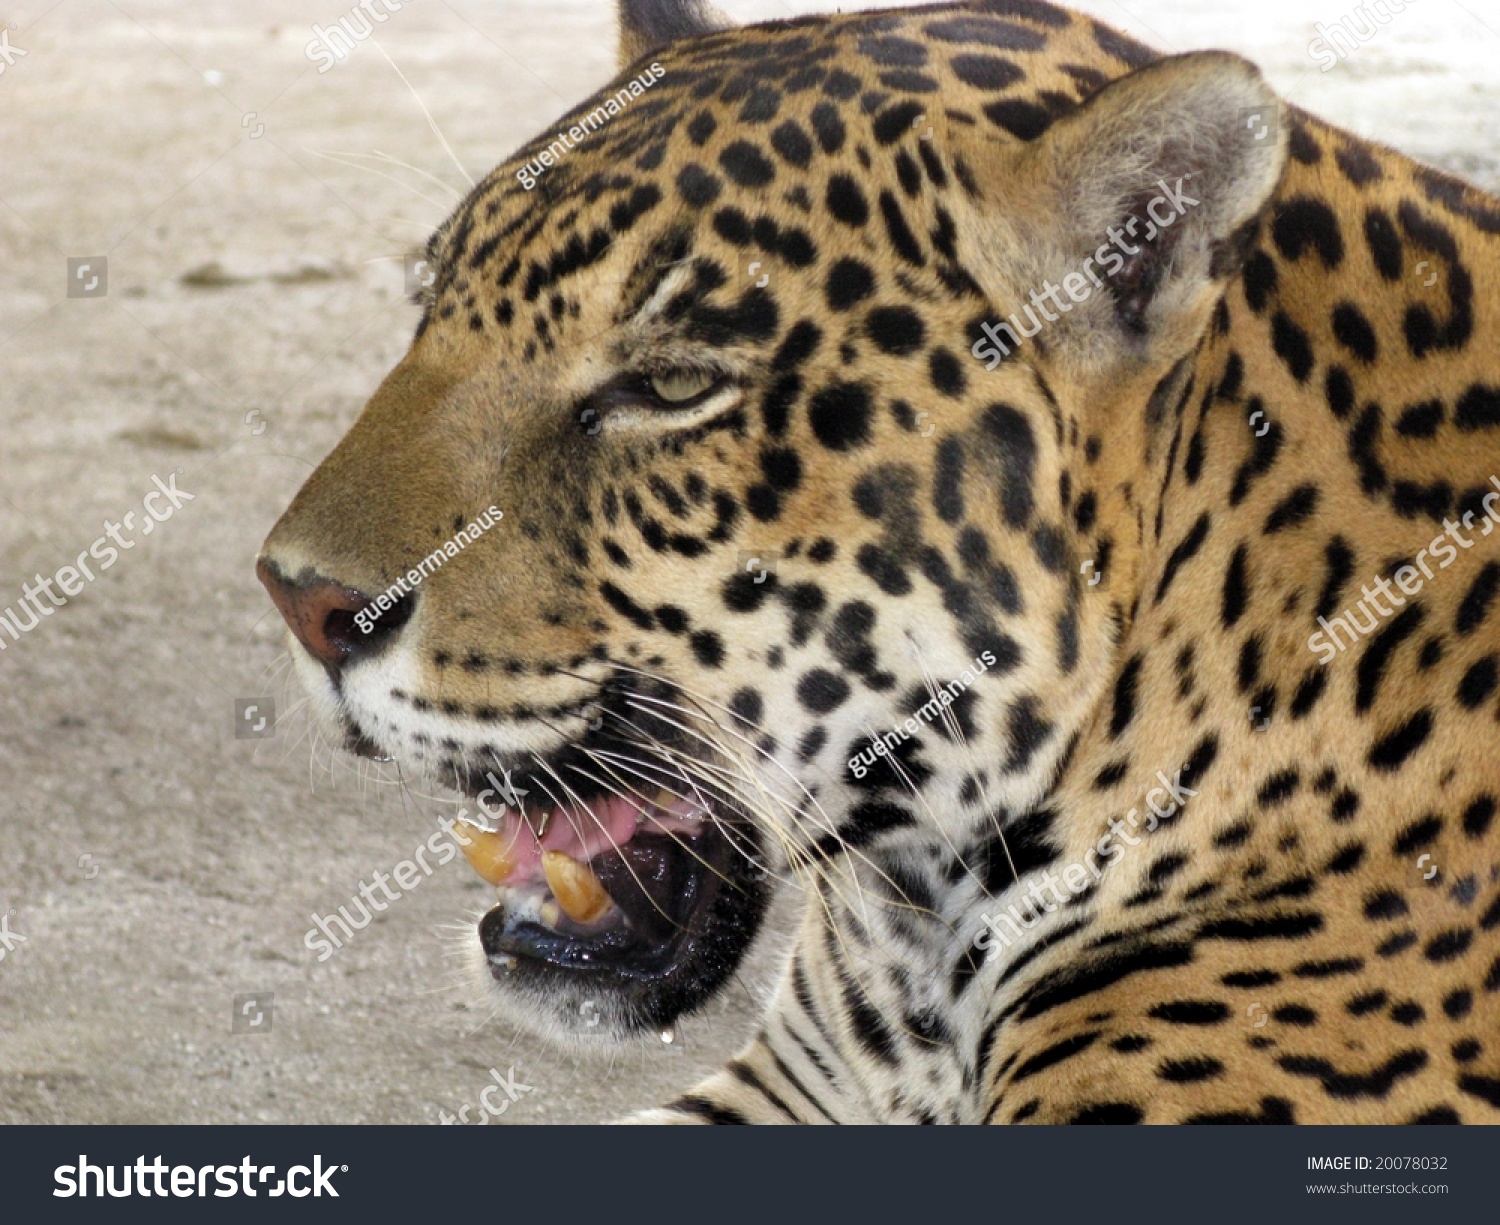 The Jaguar Or (Panthera Onca) Is A Big Cat, A Feline In The Panthera